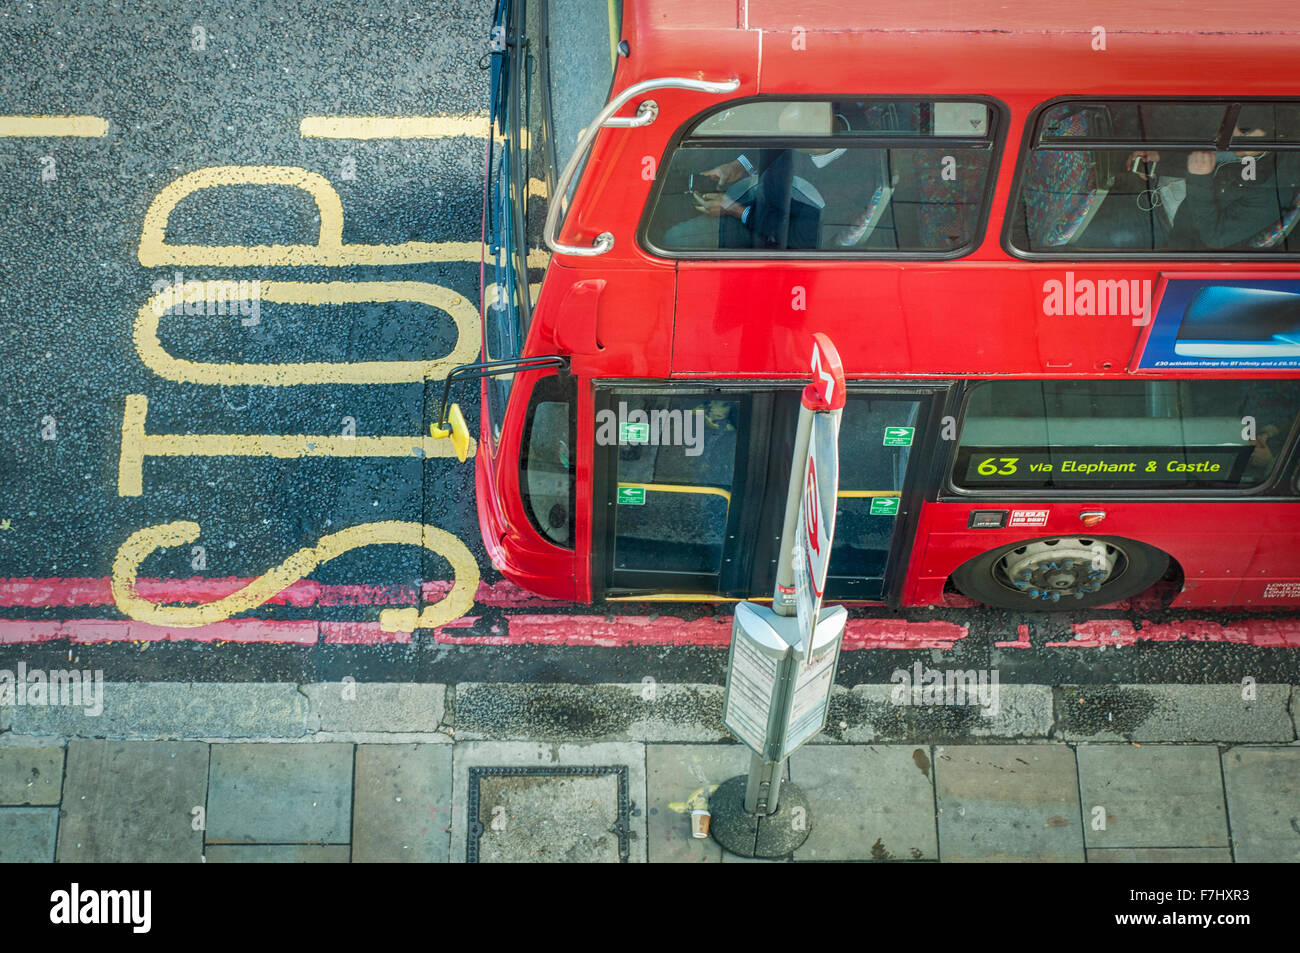 Red London Bus at bus stop viewed from above Stock Photo